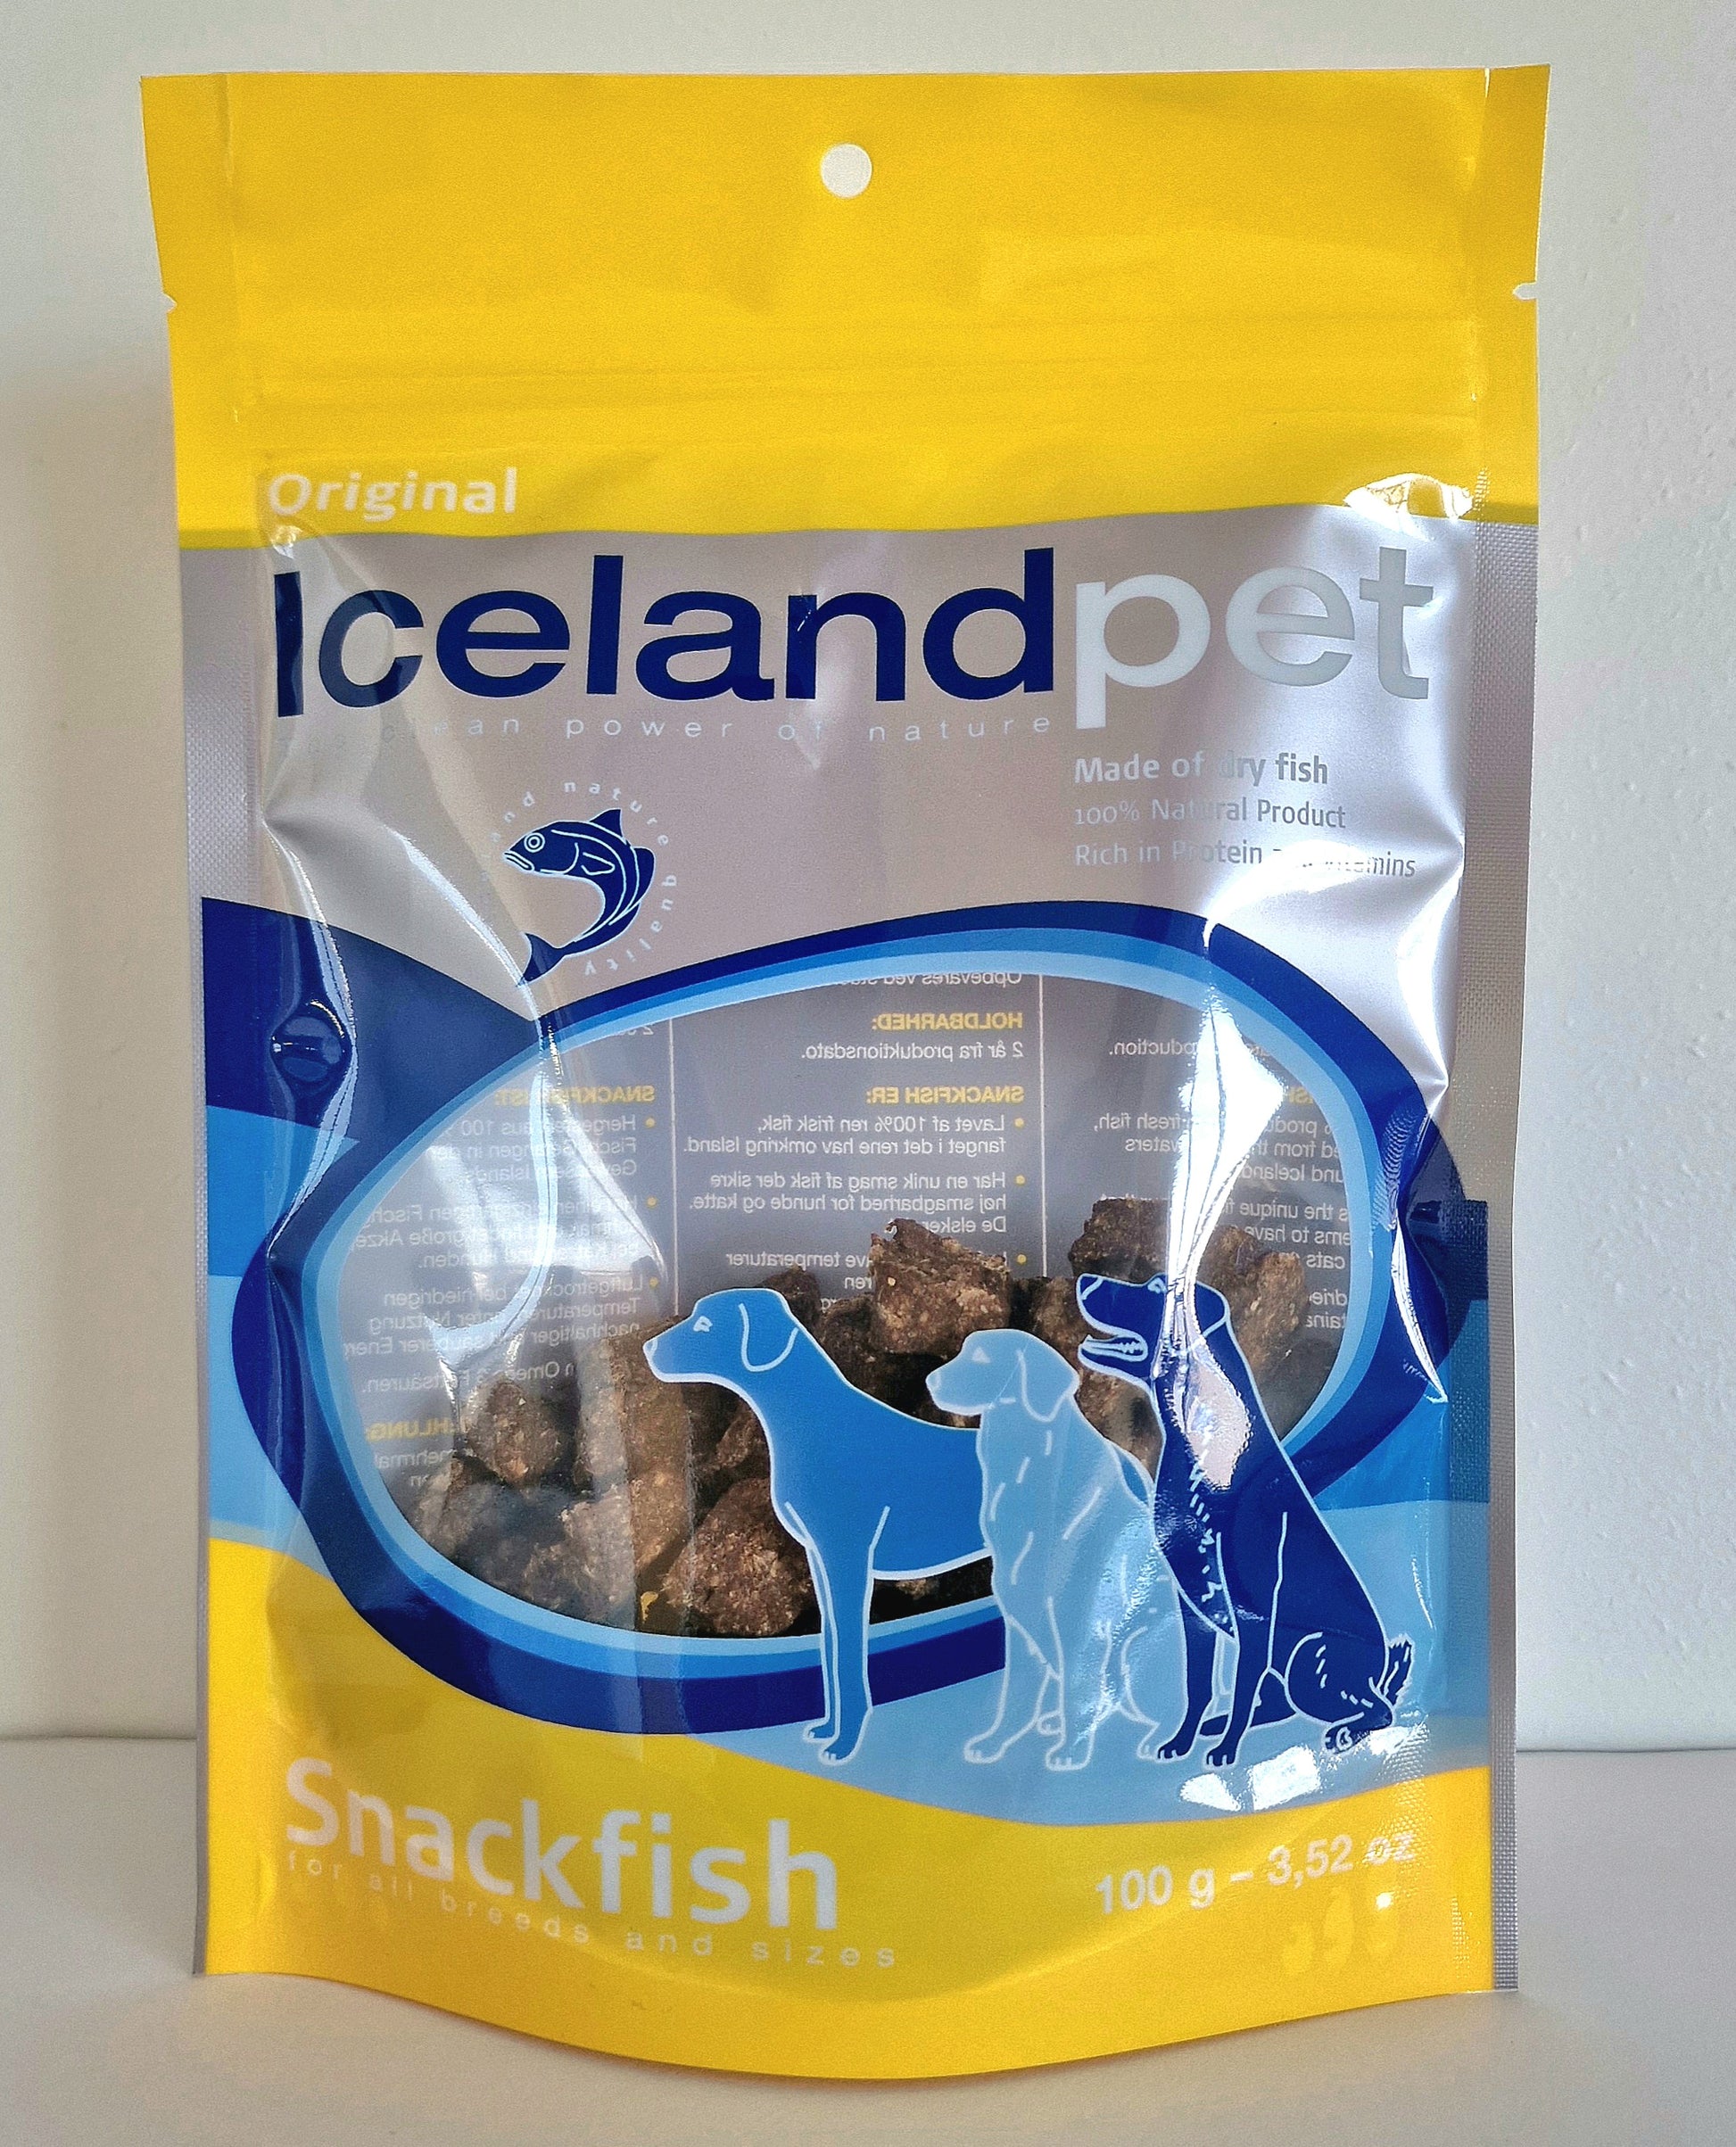 The Original Dog Treat is made from 100% pure Icelandic fish -Topiceland